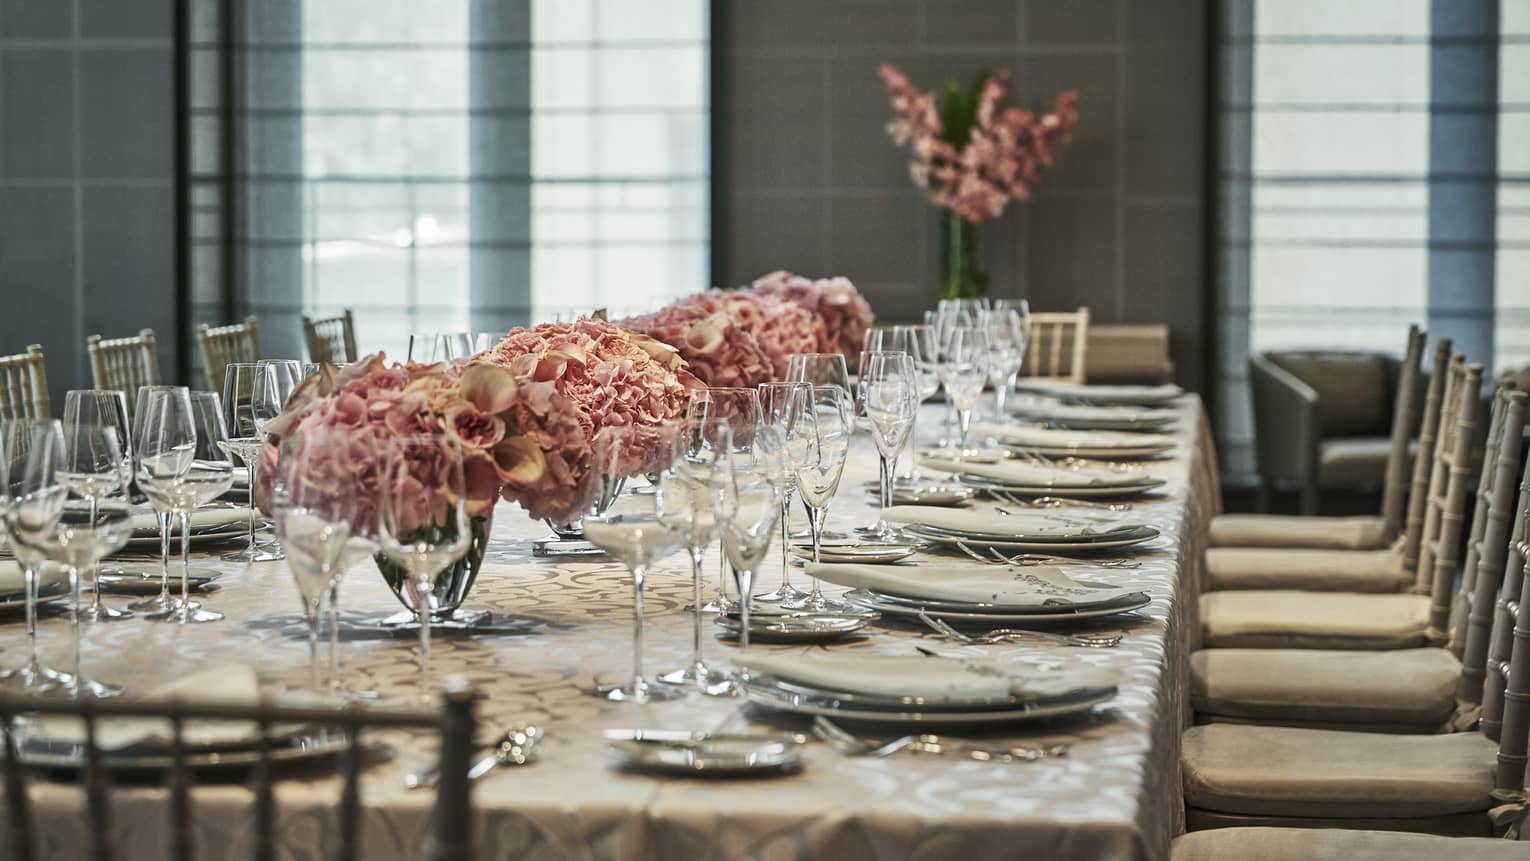 Banquet table with elegant dishes, wine glasses, pink floral arrangements in Chambers room